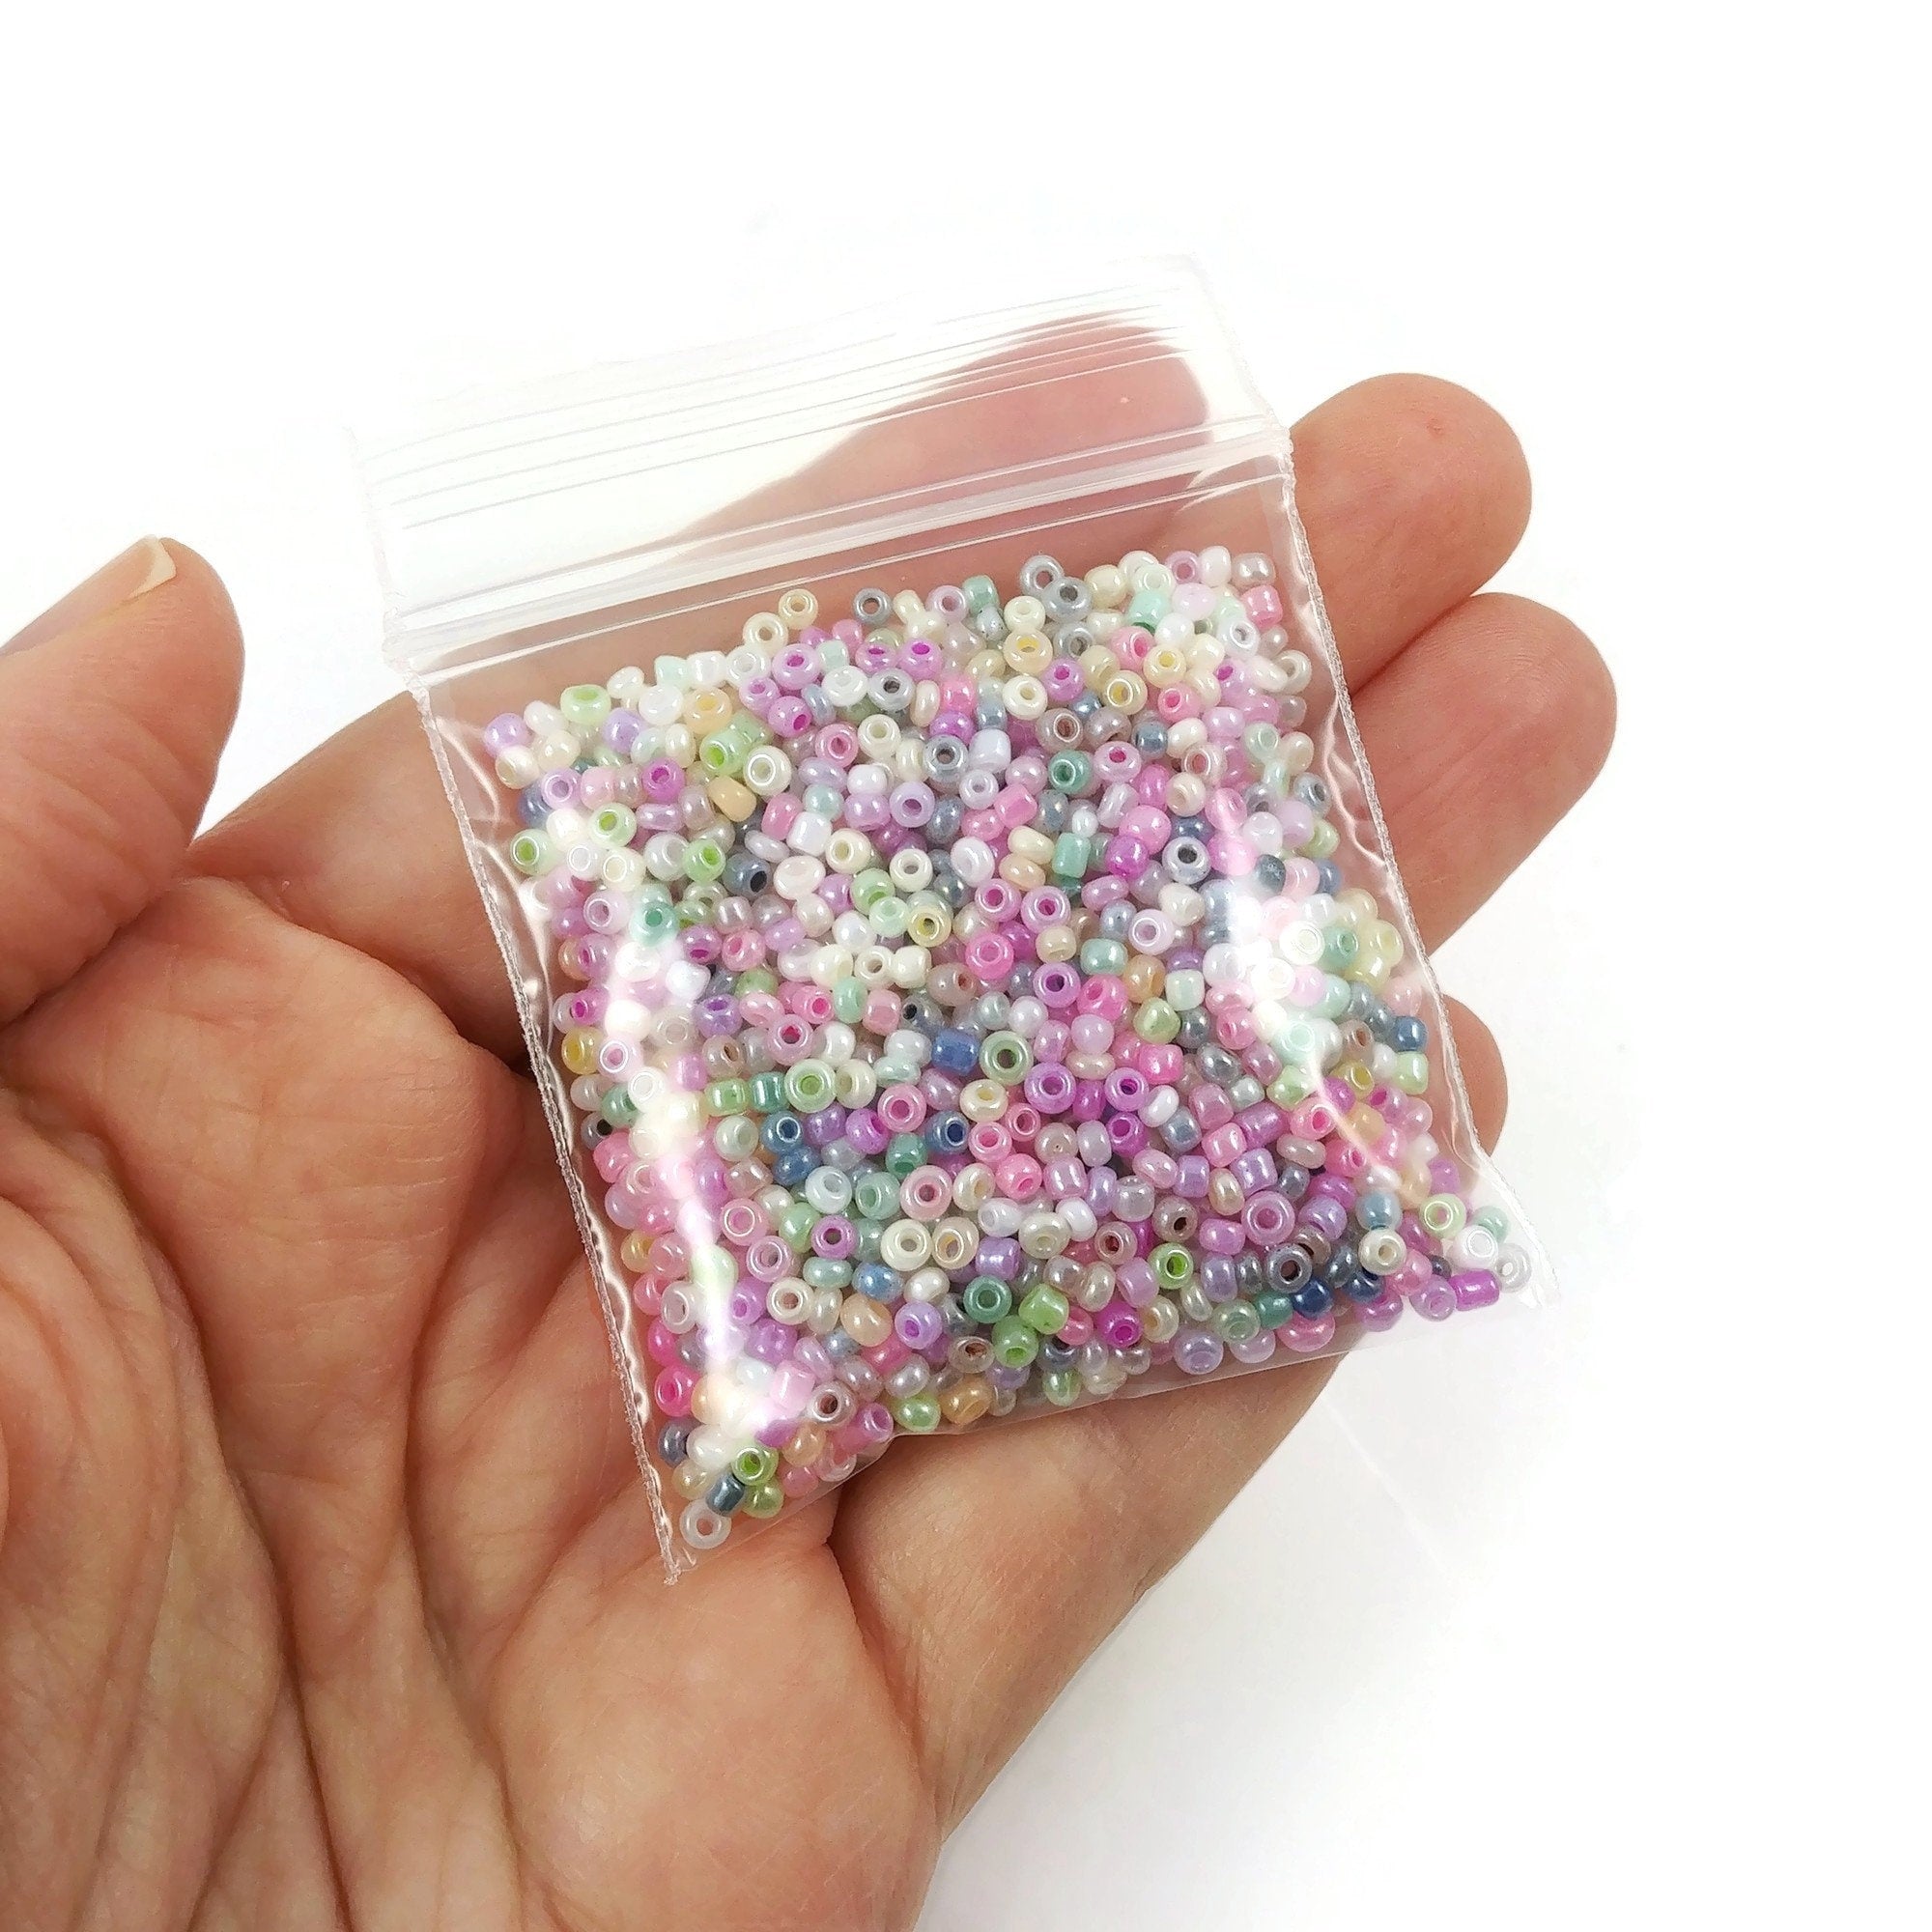  Mix Jewelry Beadss, 4mm Multi Colored Glass Seed Bead